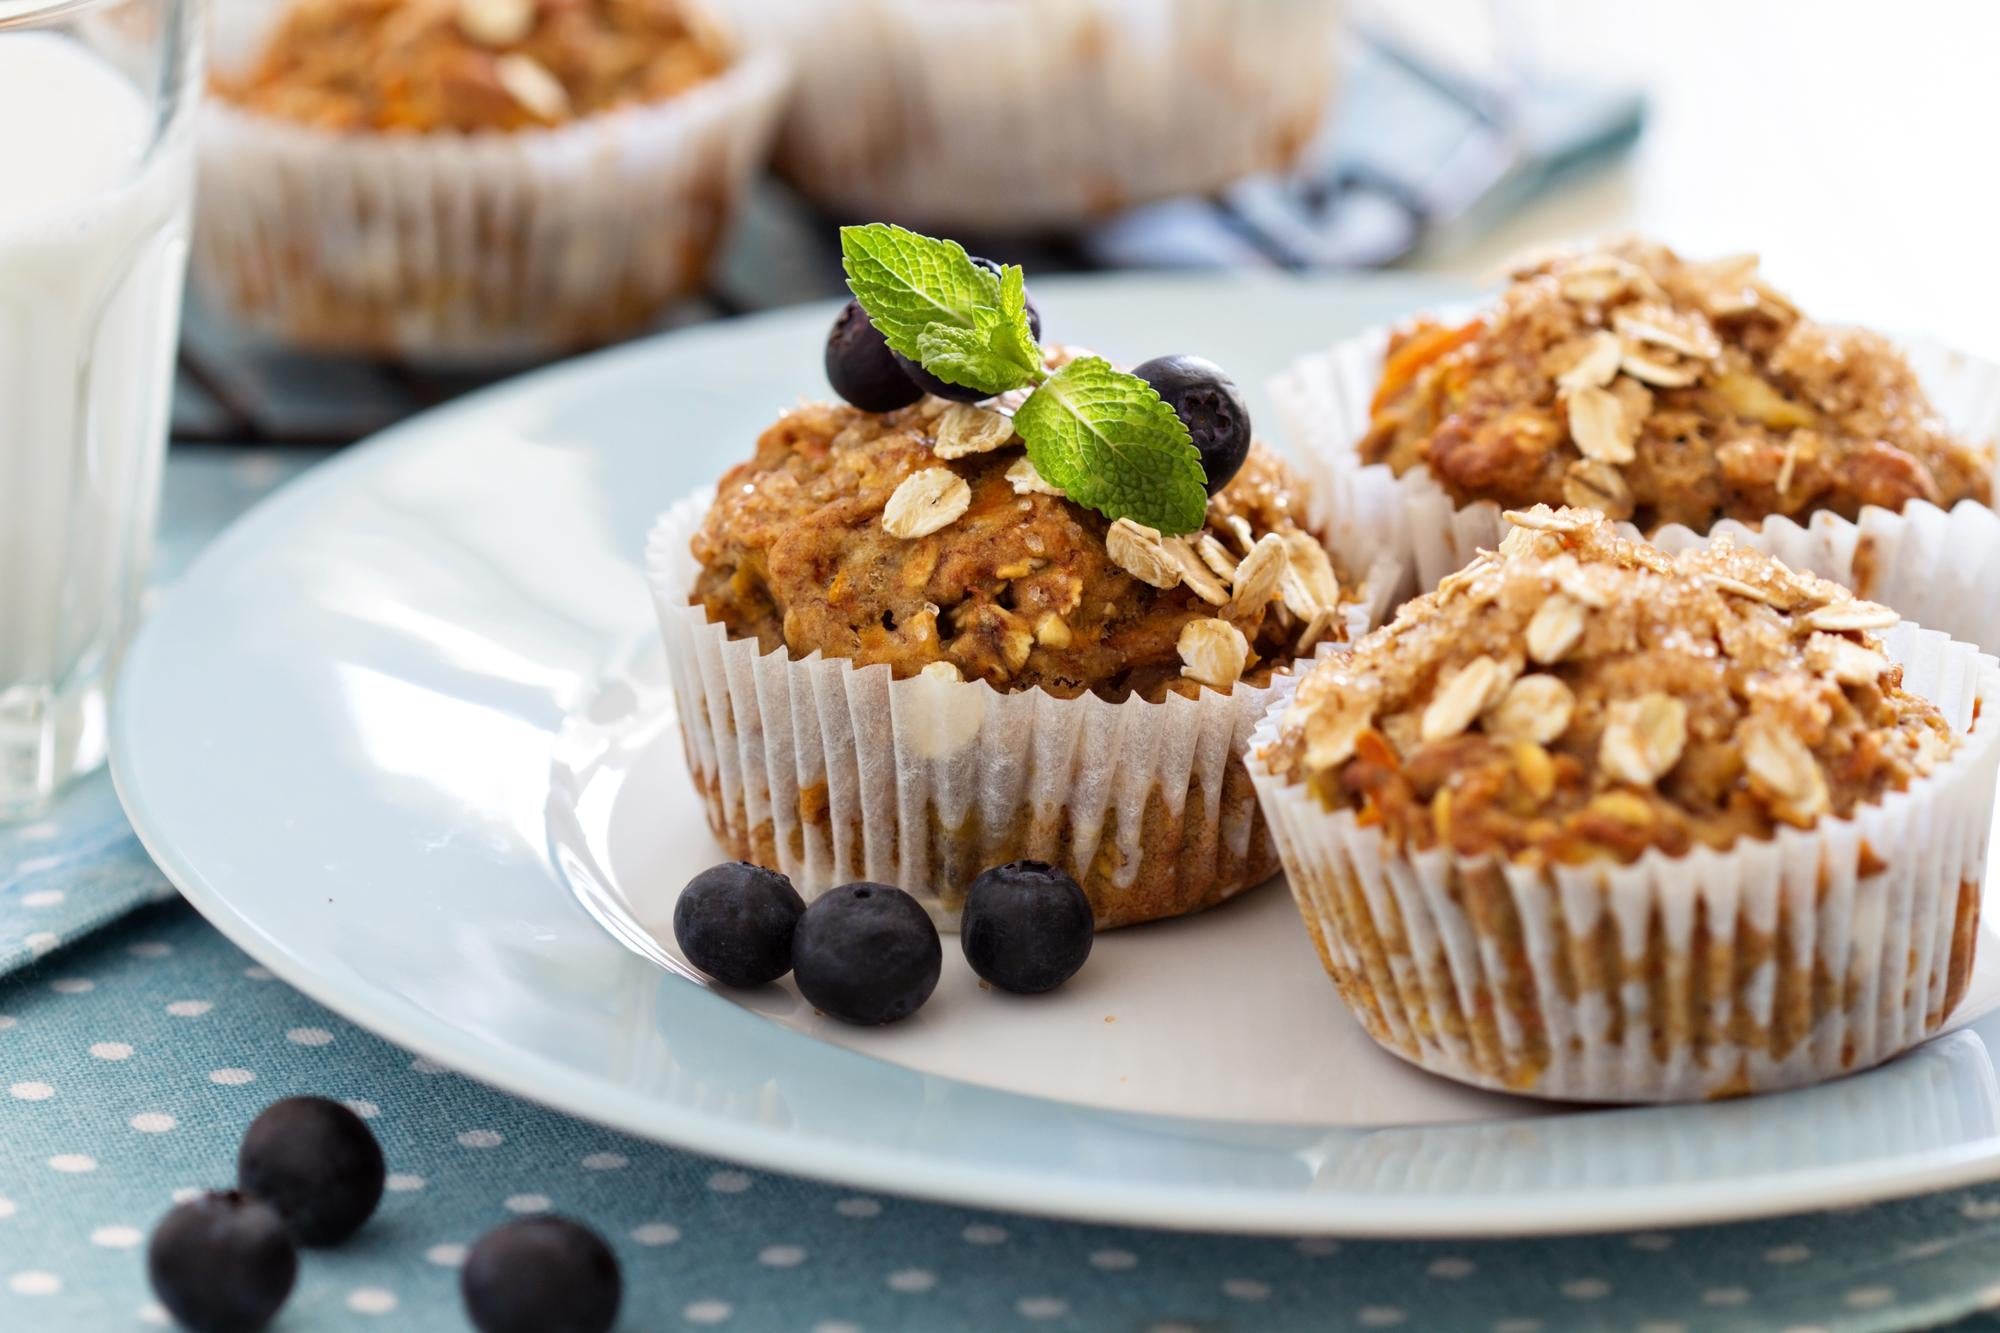 A Classic Oat Bran Muffins Recipe for a Nutrient-Packed Snack